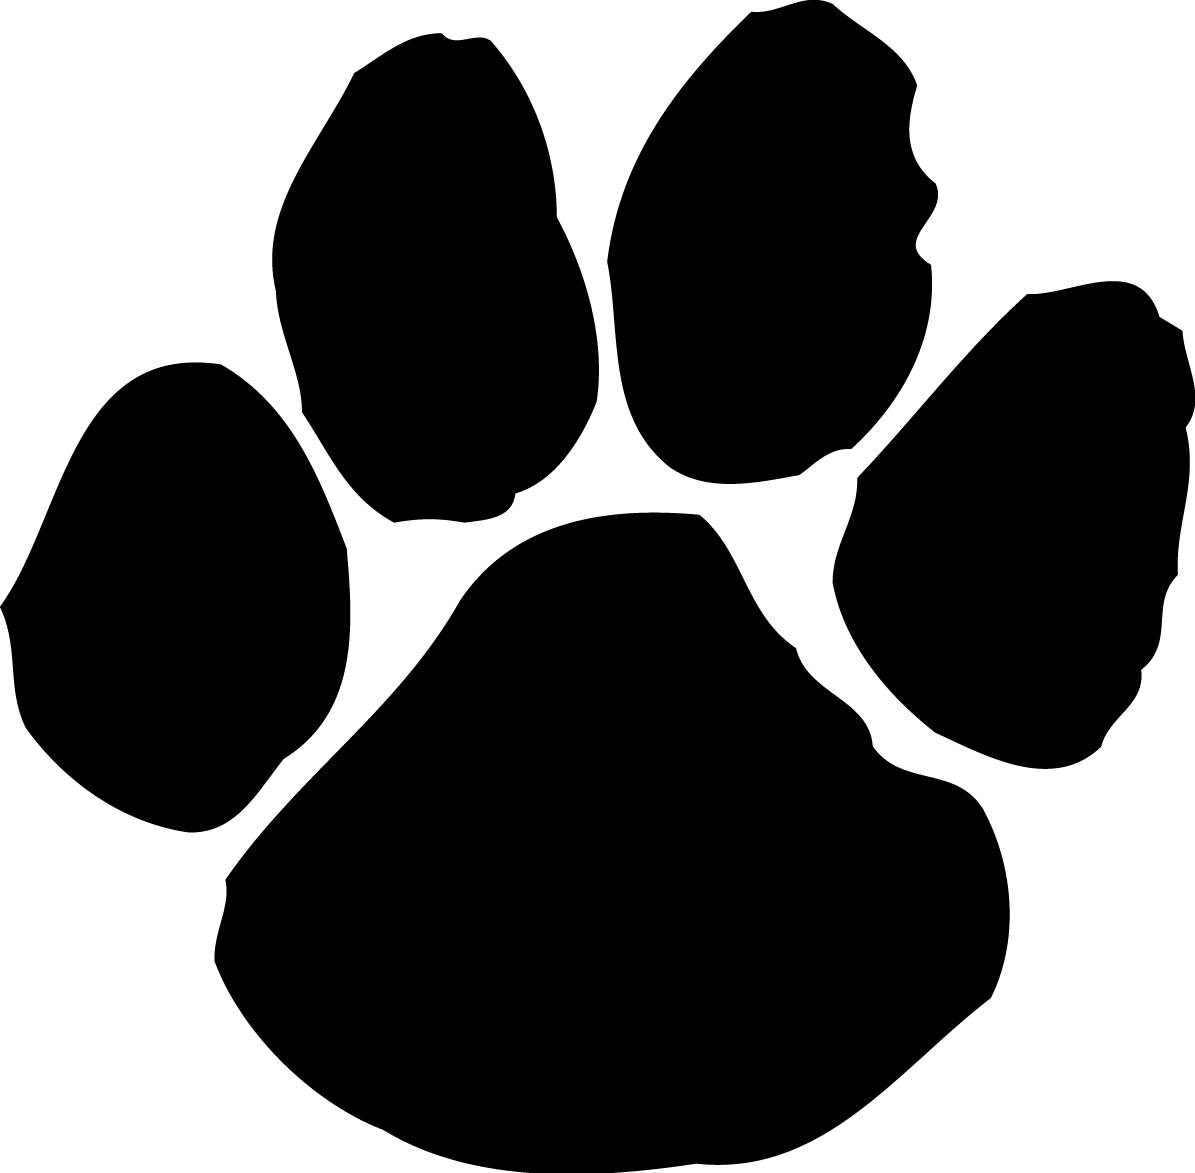 Cute Dog Paw Print - Clipart library